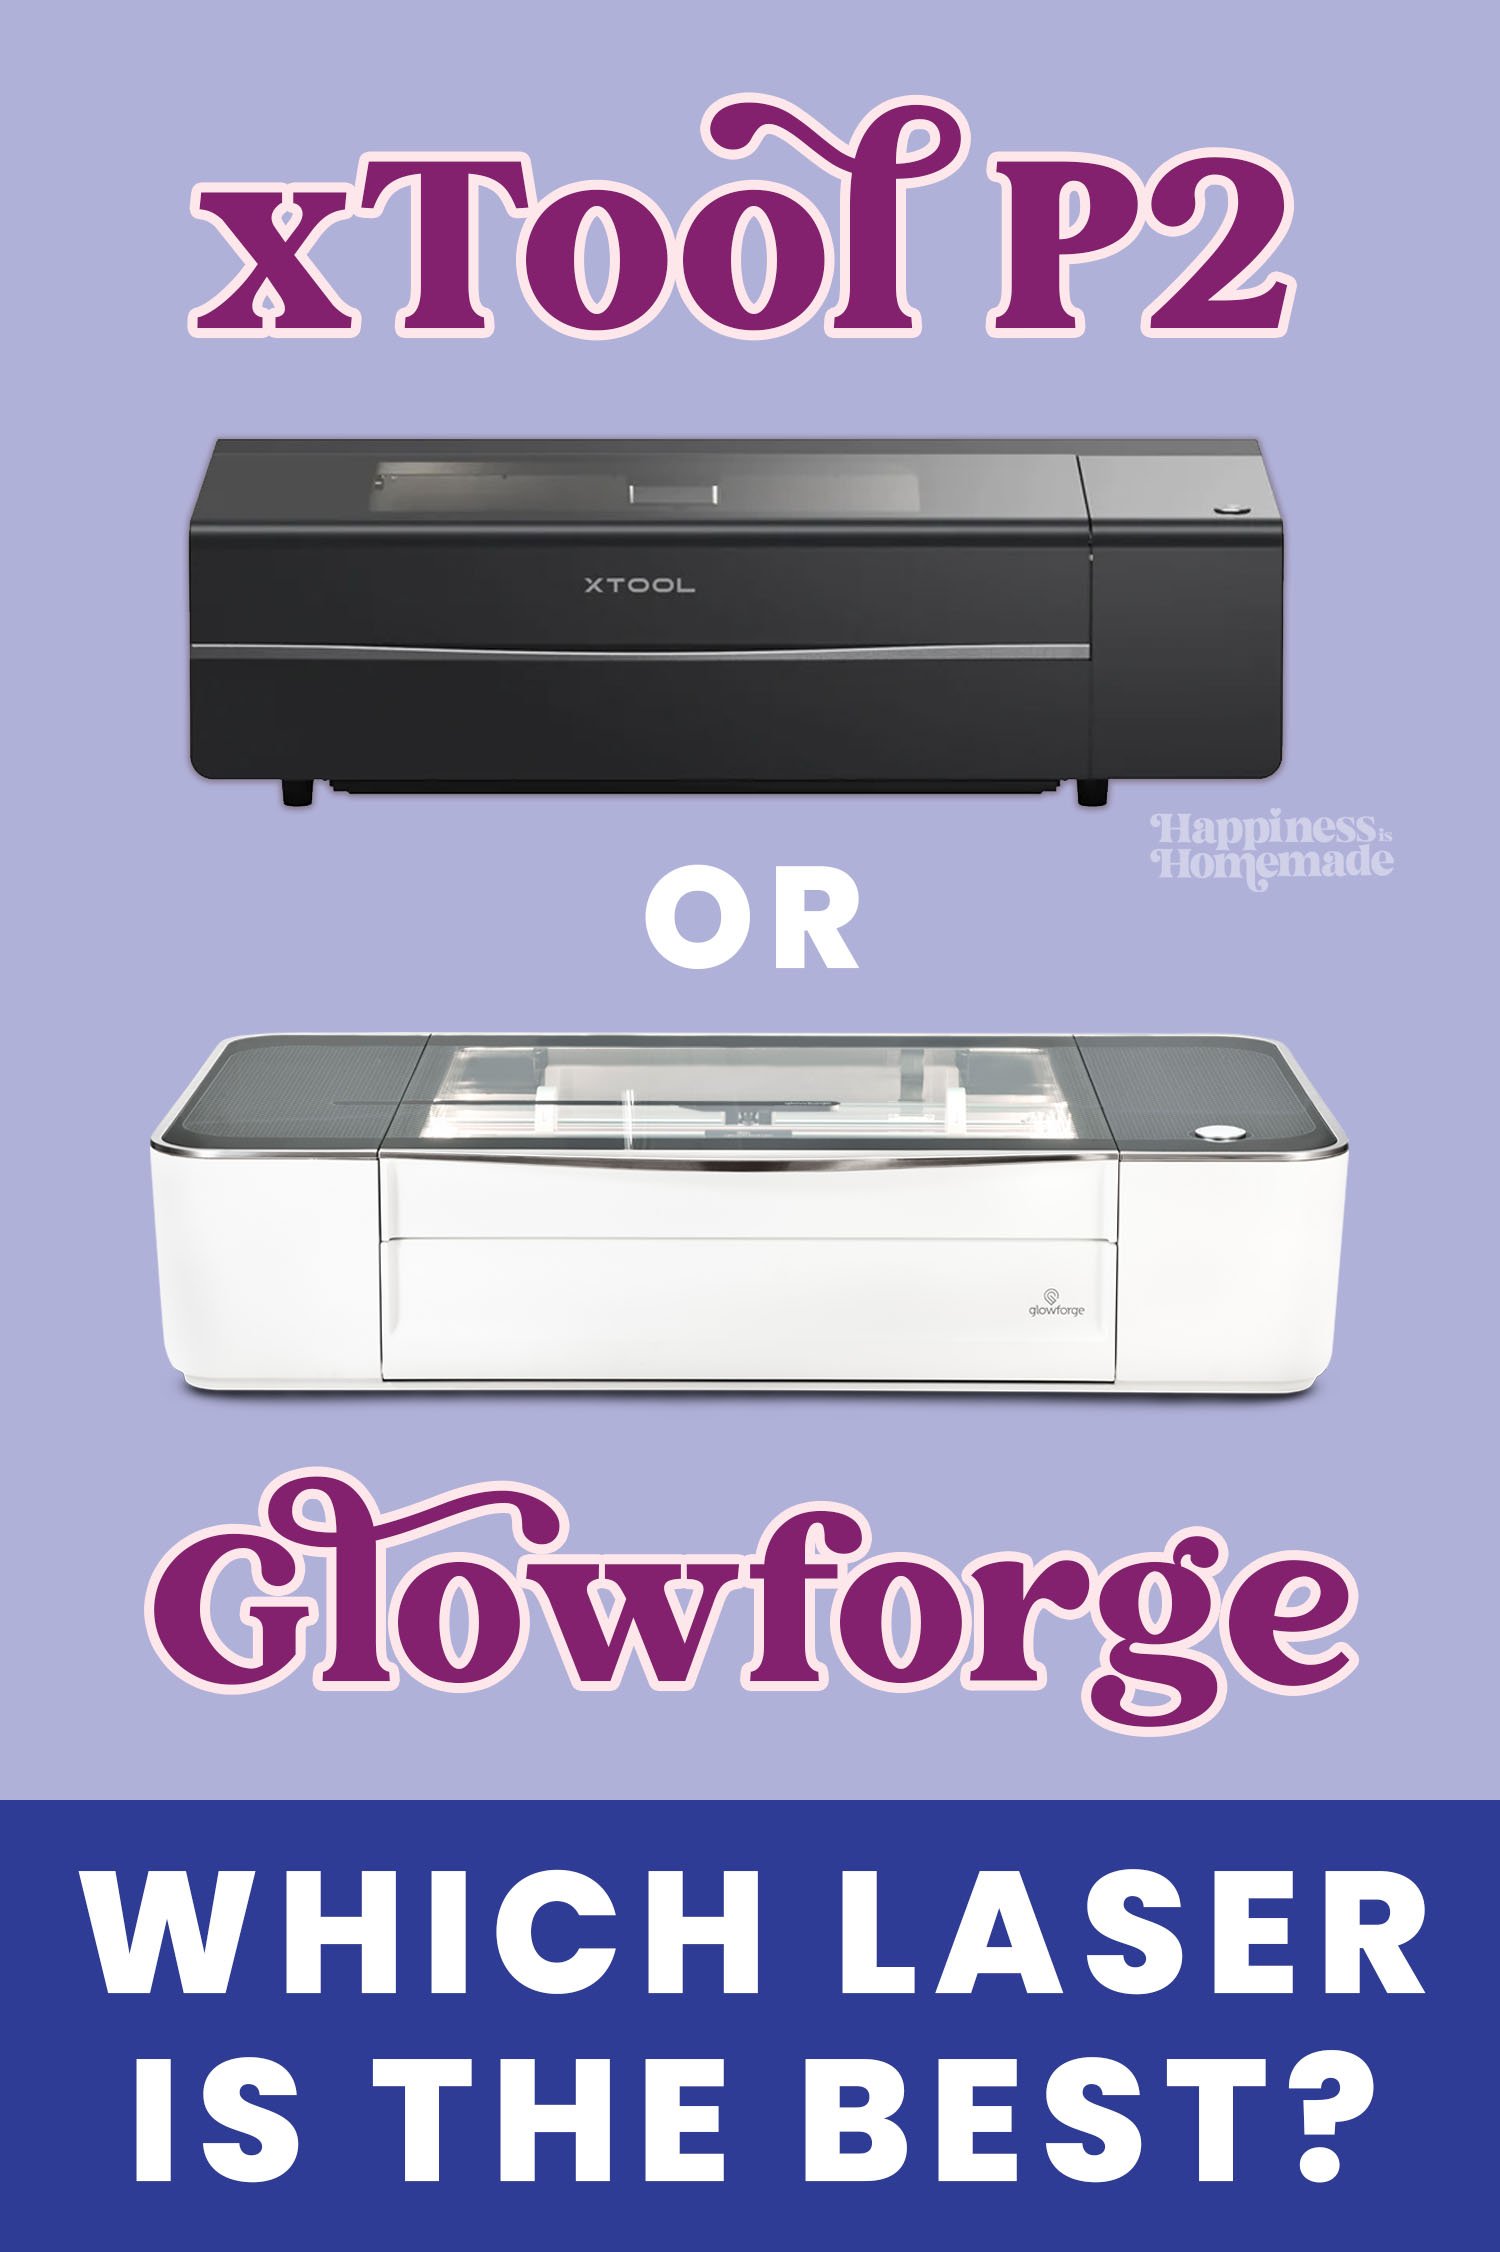 "xTool P2 or Glowforge: Which Laser is the Best?" graphic with images of laser cutters on blue background